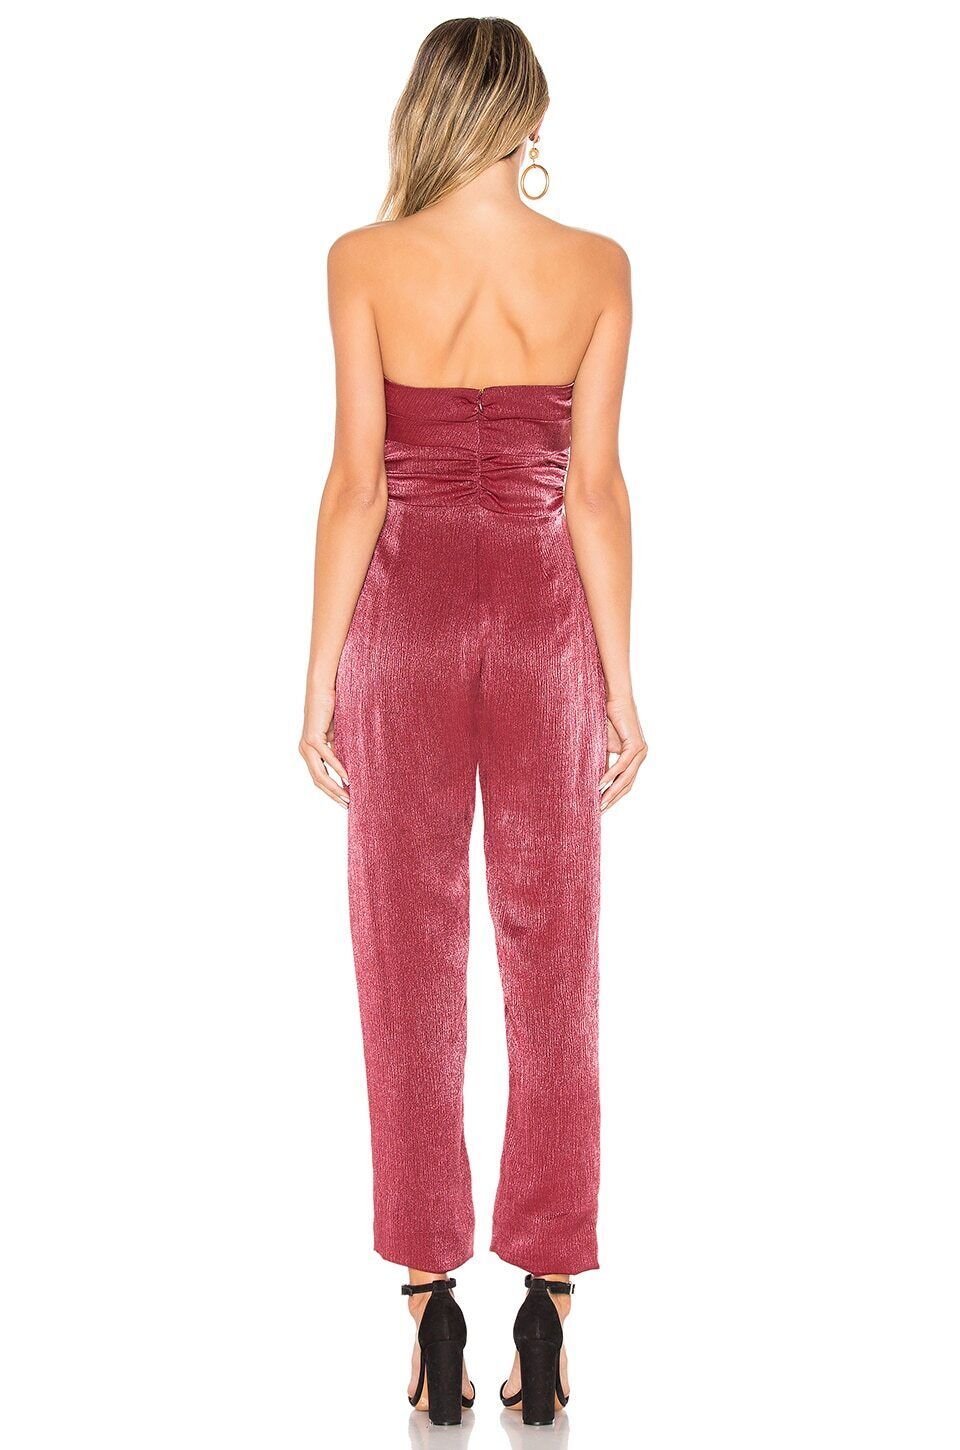 House of Harlow 1960 x REVOLVE Opal Jumpsuit in Raspberry Red